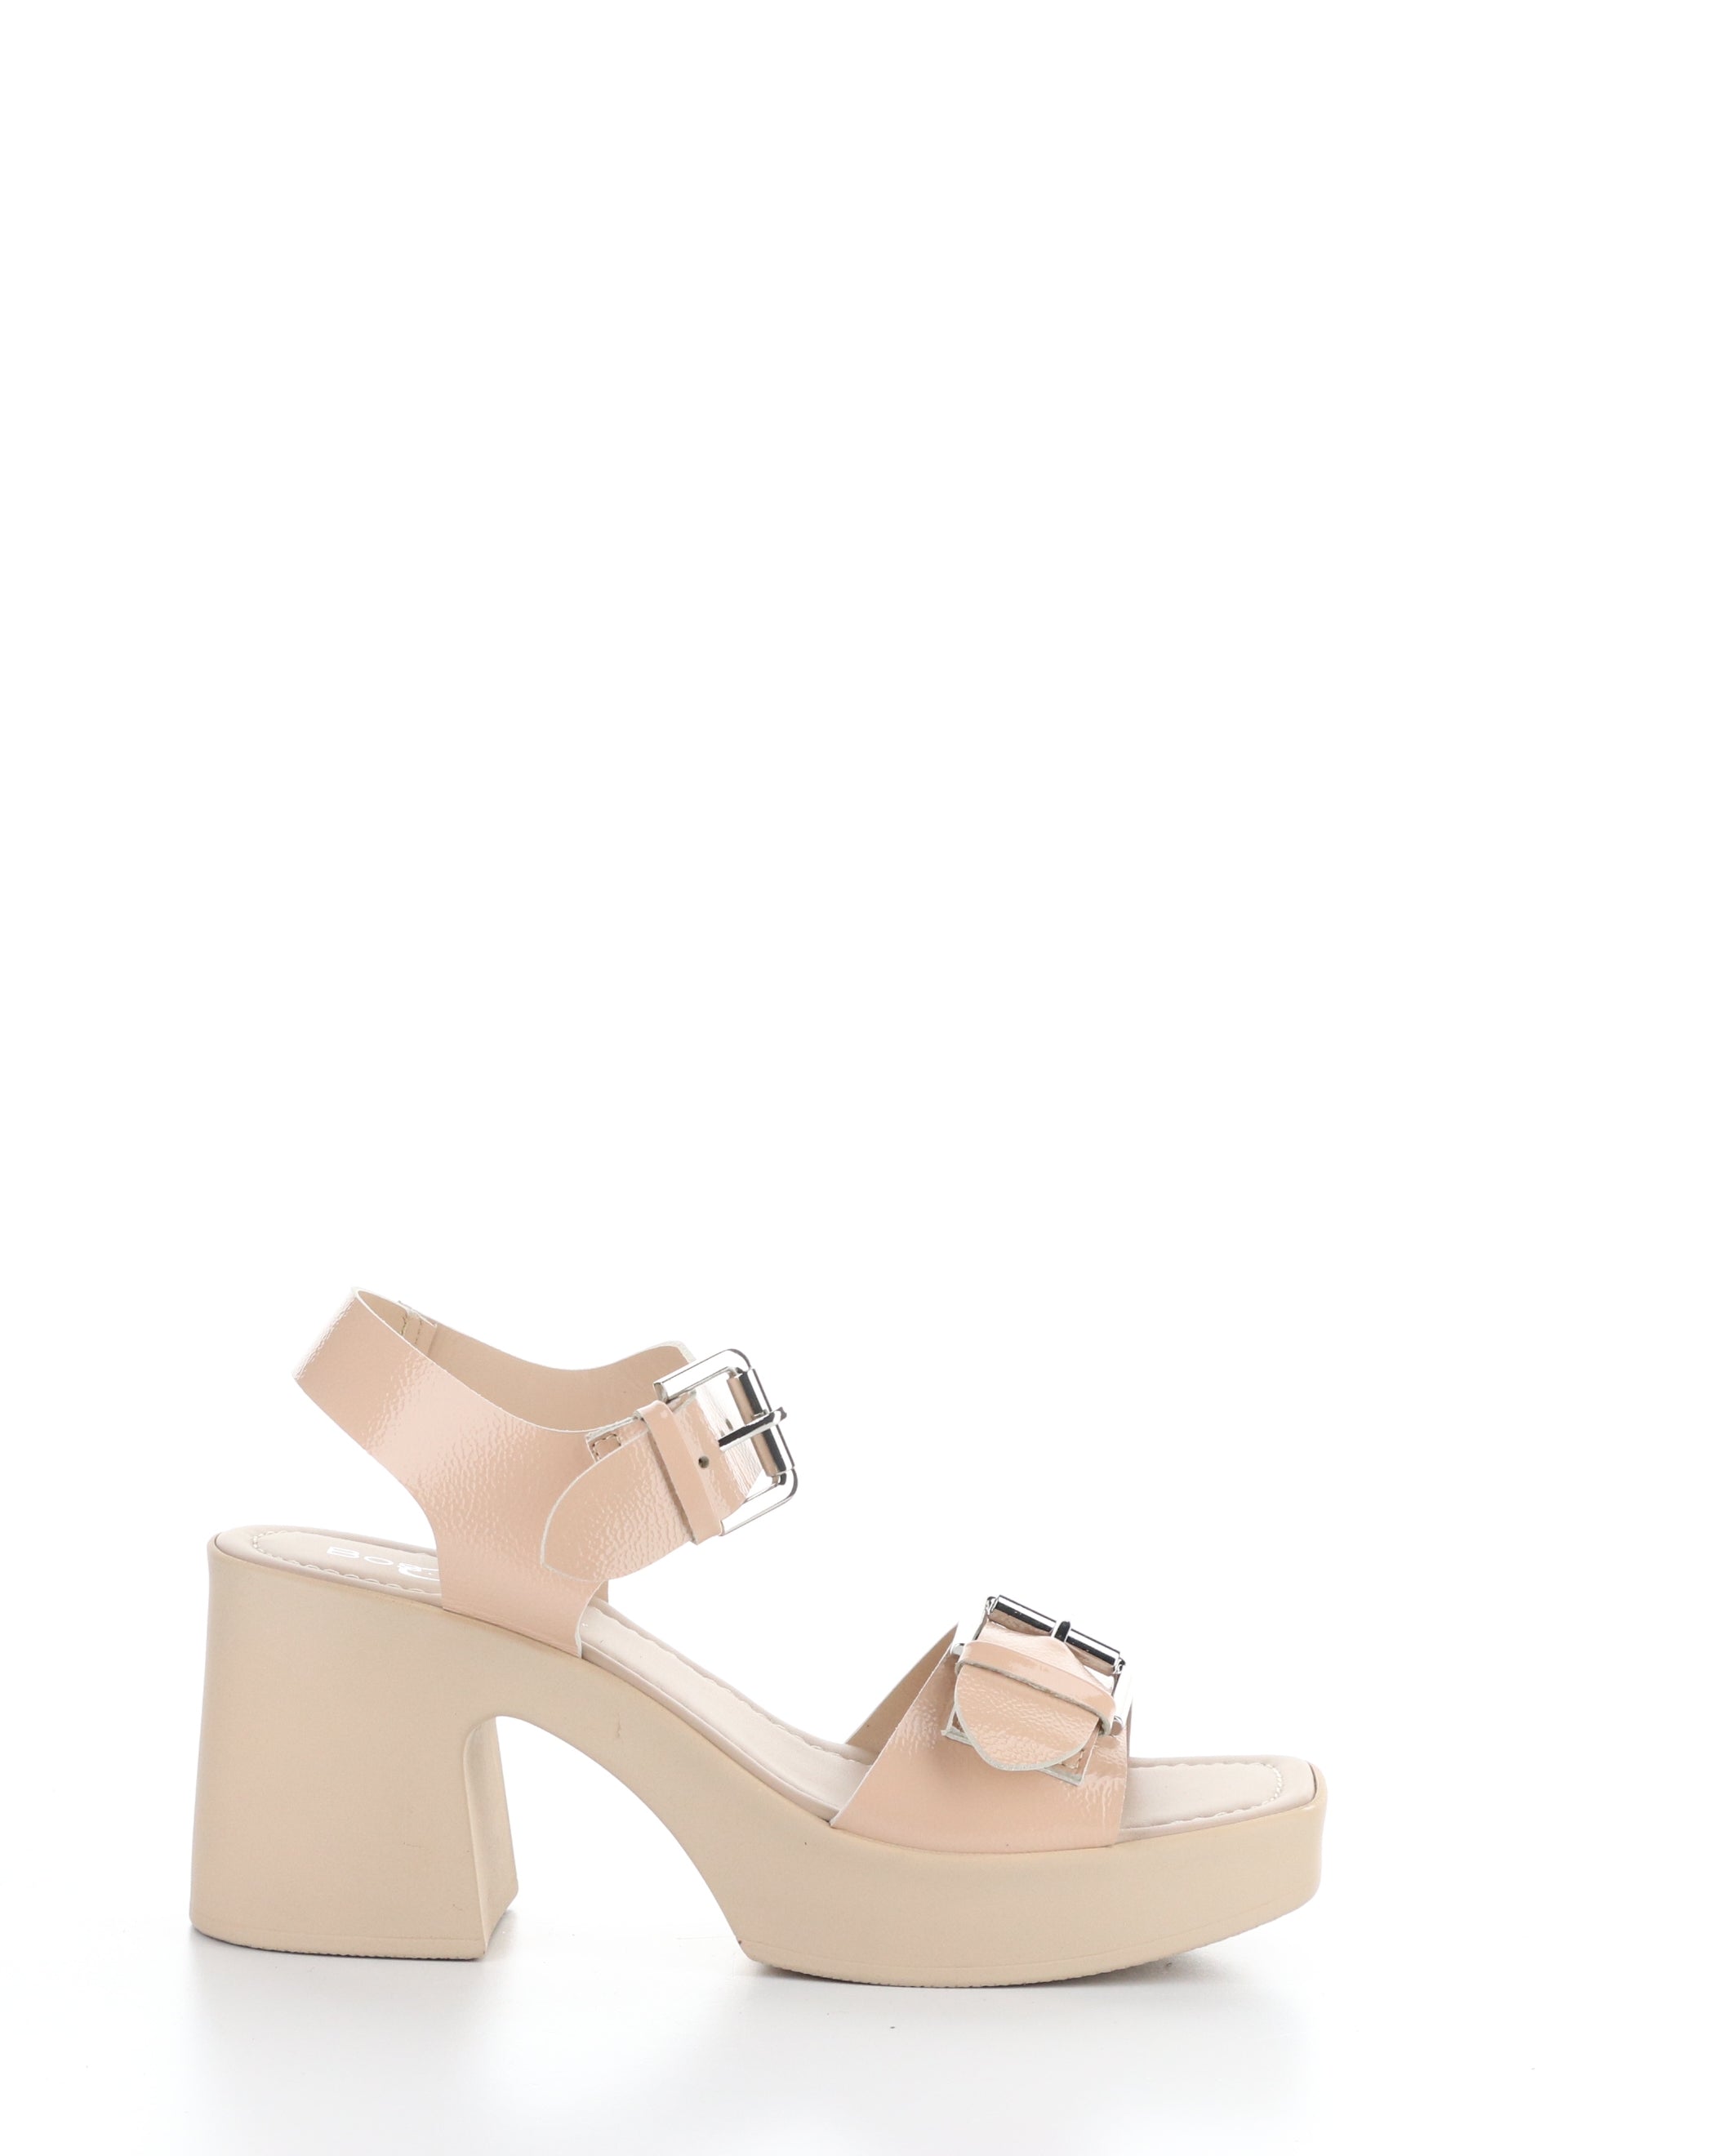 Bos and Co Vela Nude Leather